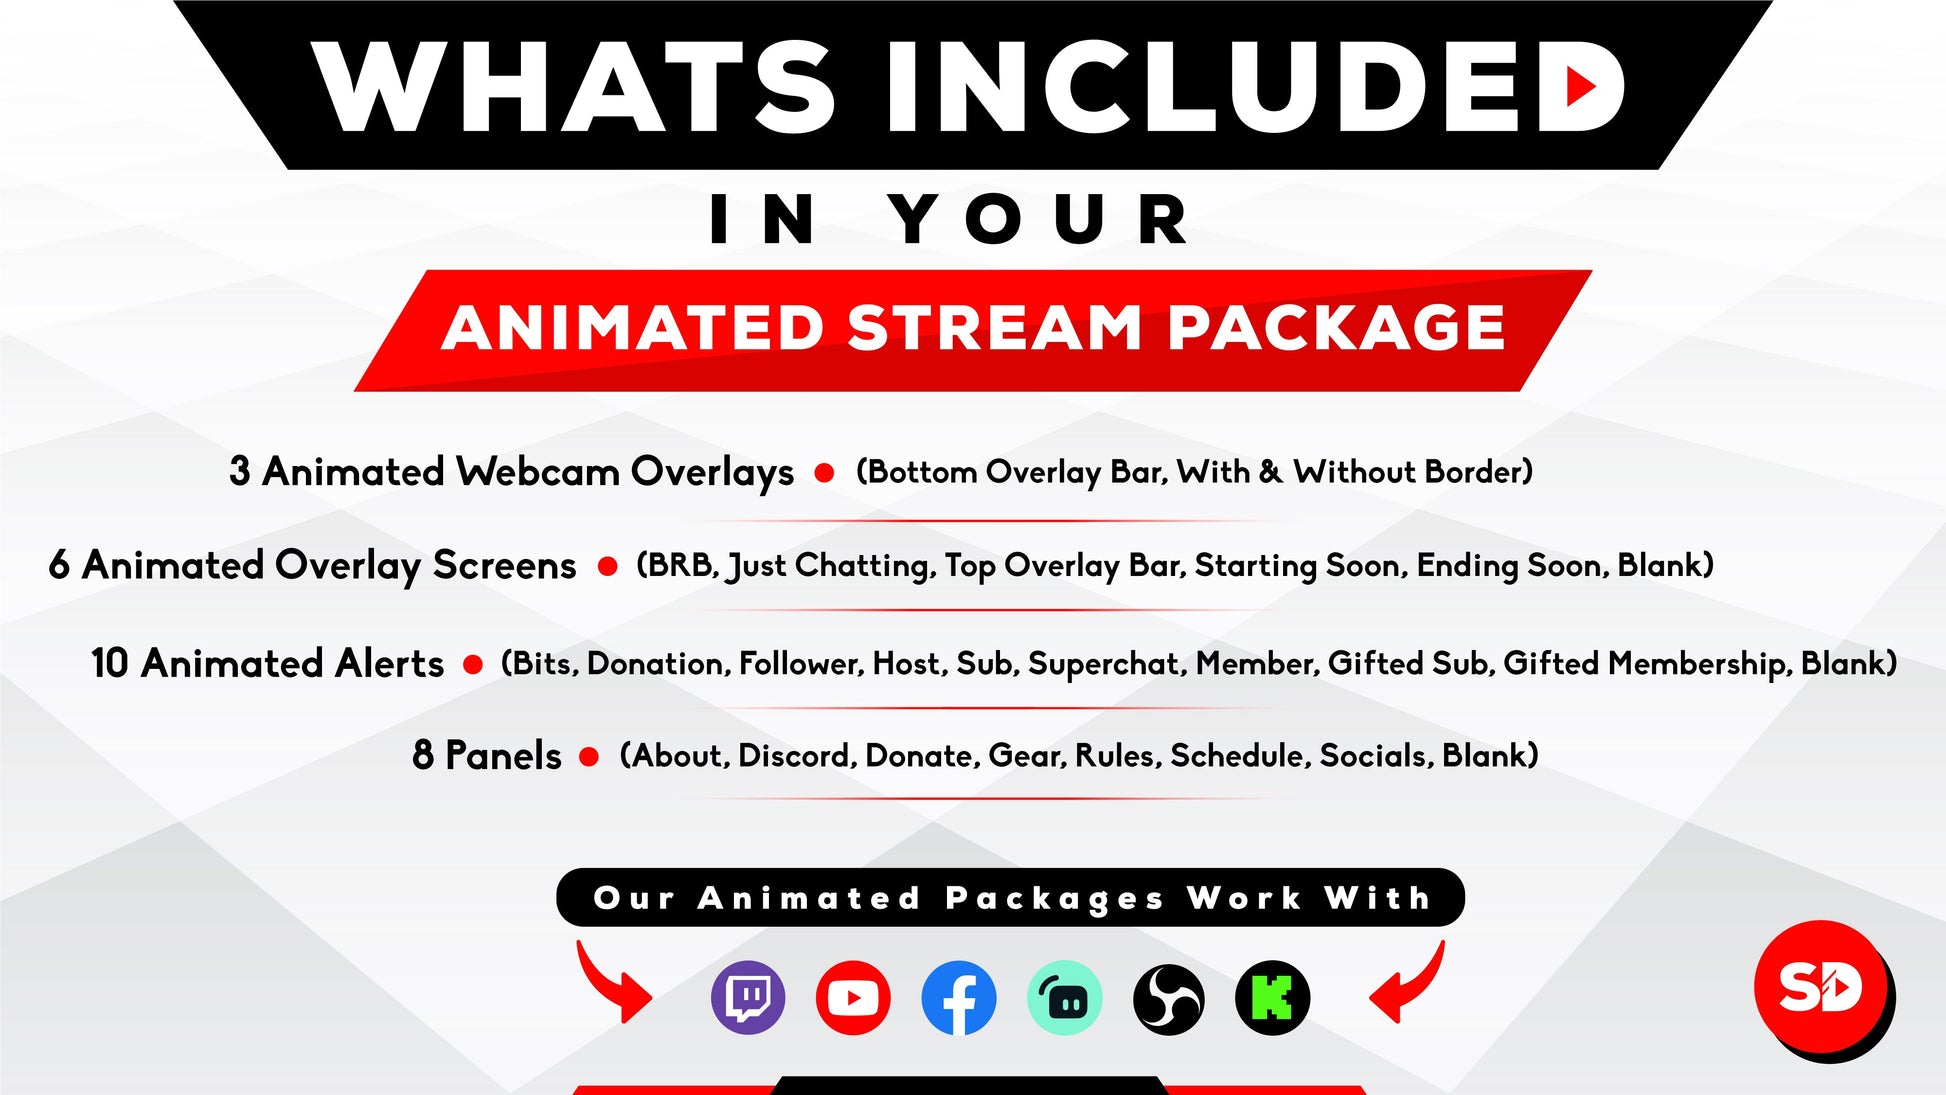 whats included in your stream package - animated overlay package - buckets - stream designz